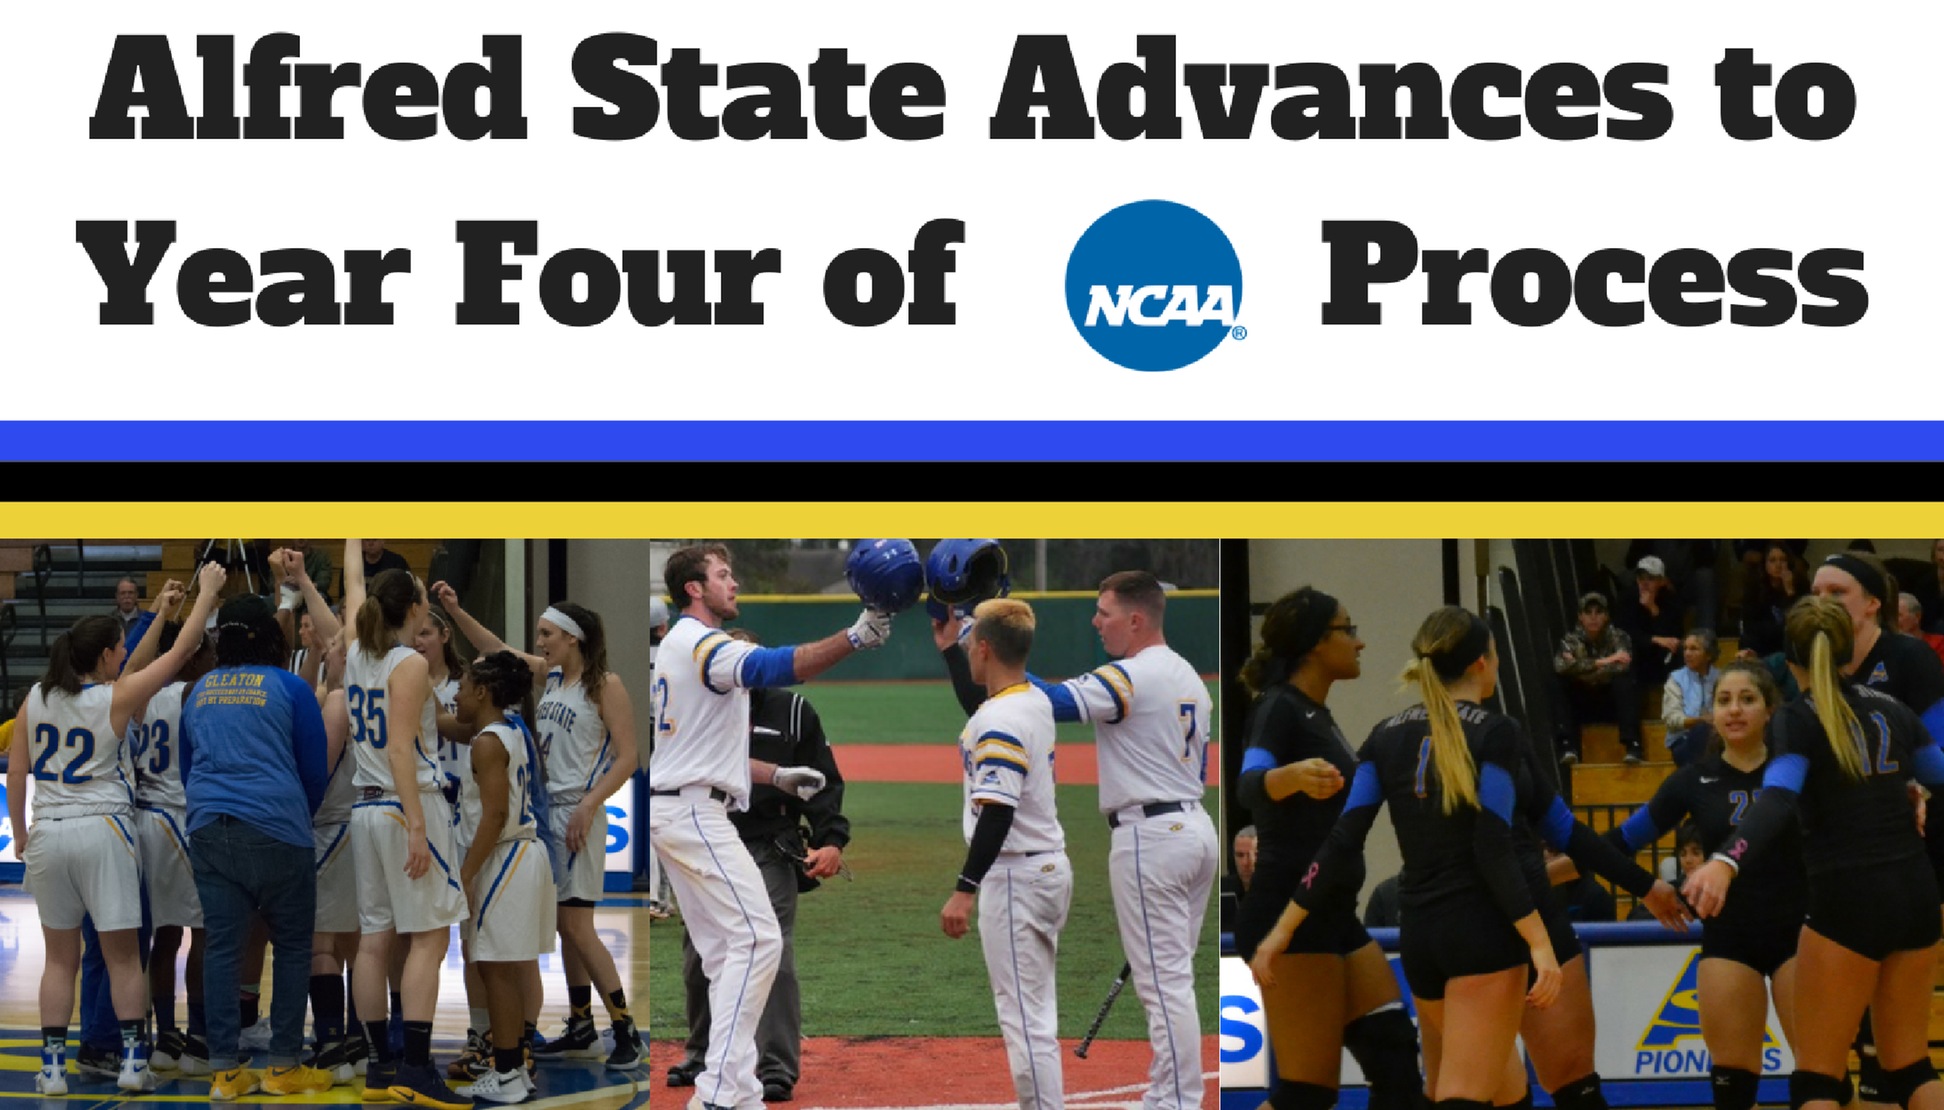 Alfred State Advances to Year Four of NCAA Process